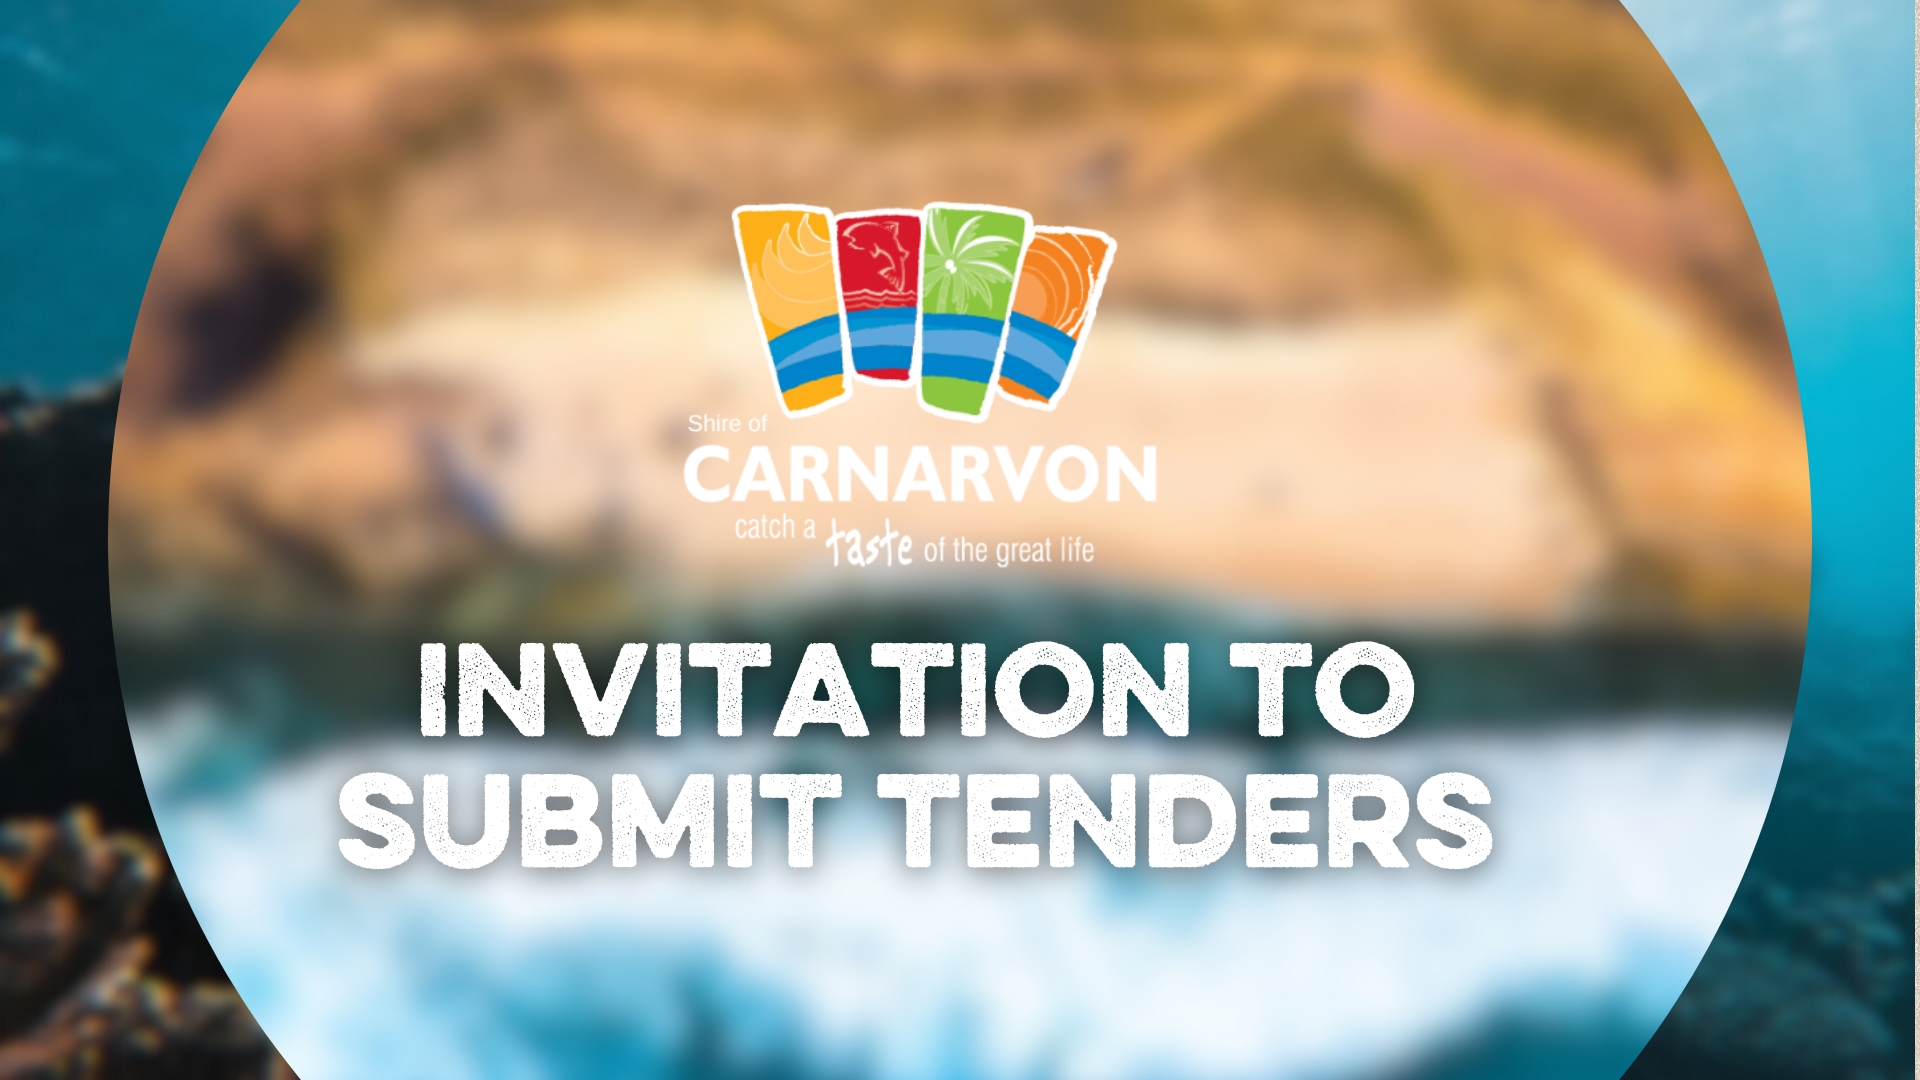 Invitation to Submit Tender